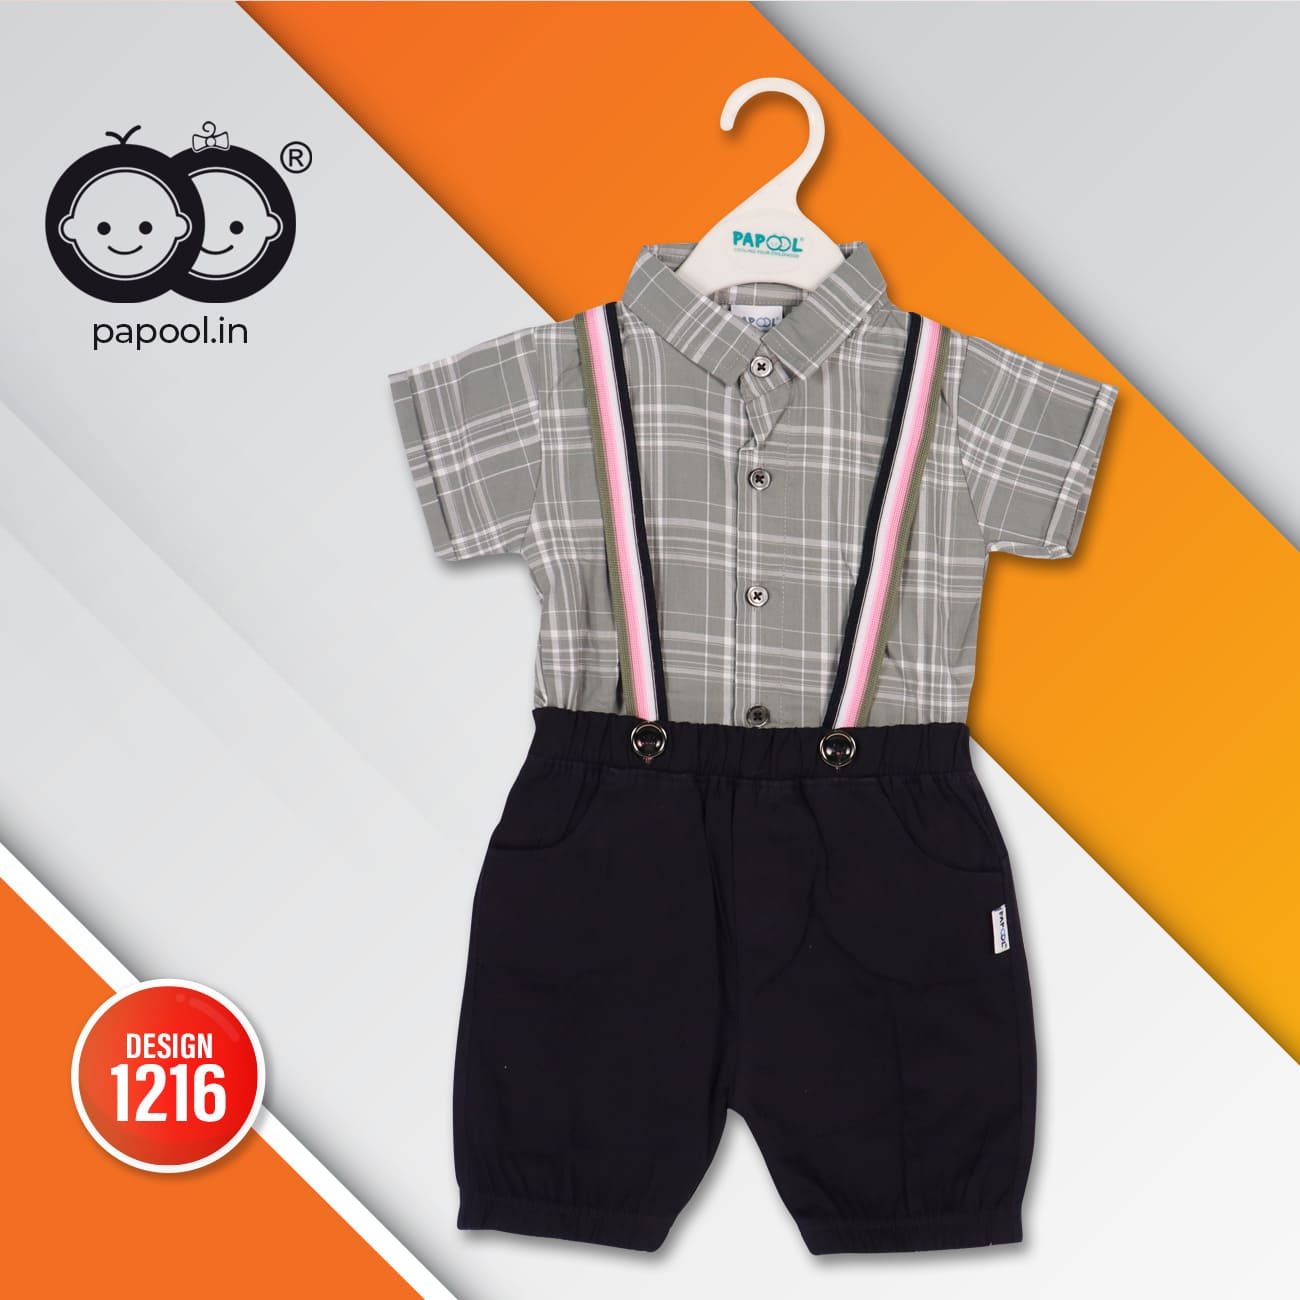 Papool+Stylish Party Wear Romper